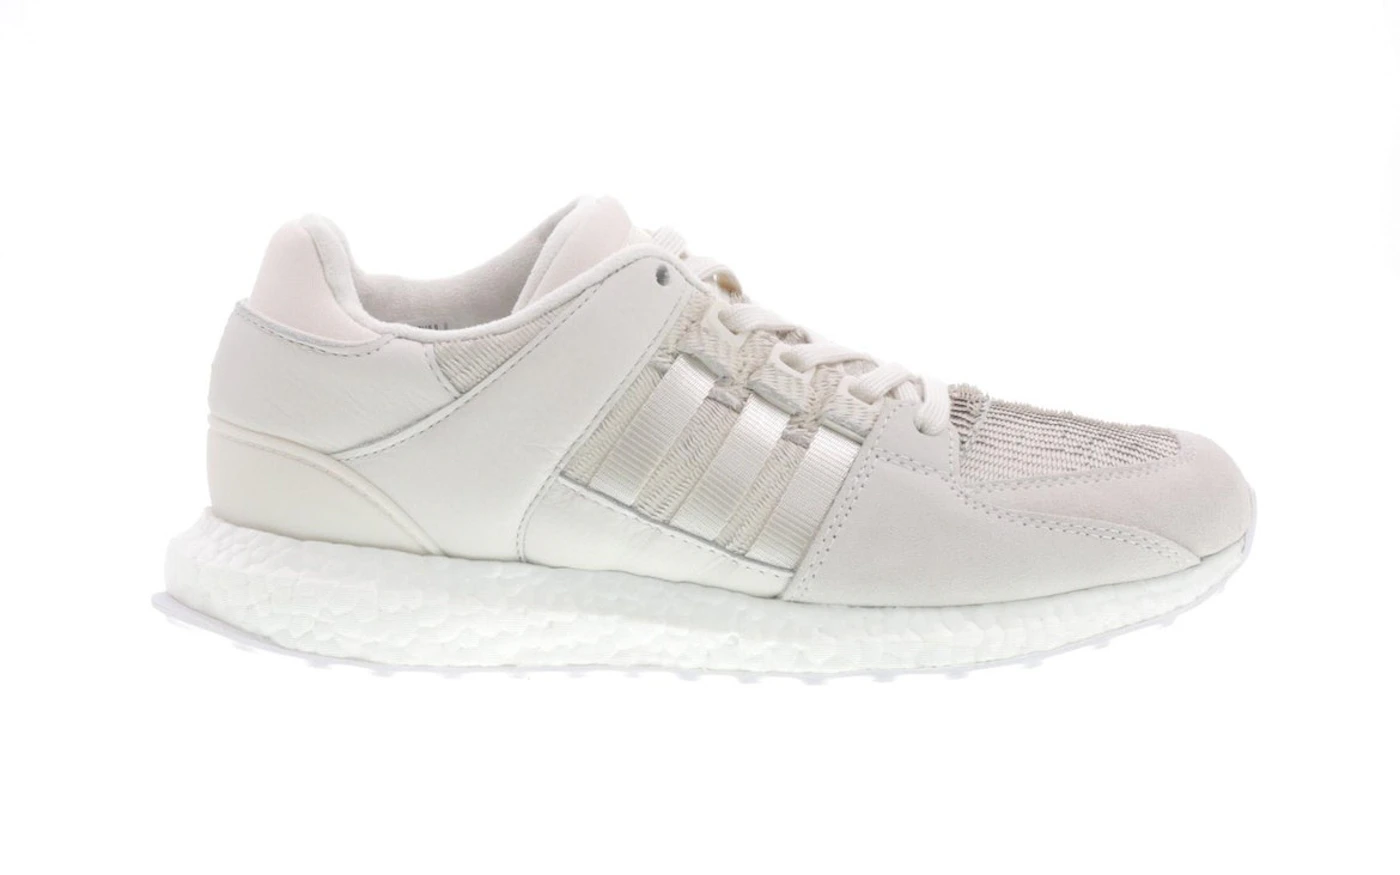 EQT Support 93/16 Chinese New Year Men's - - US